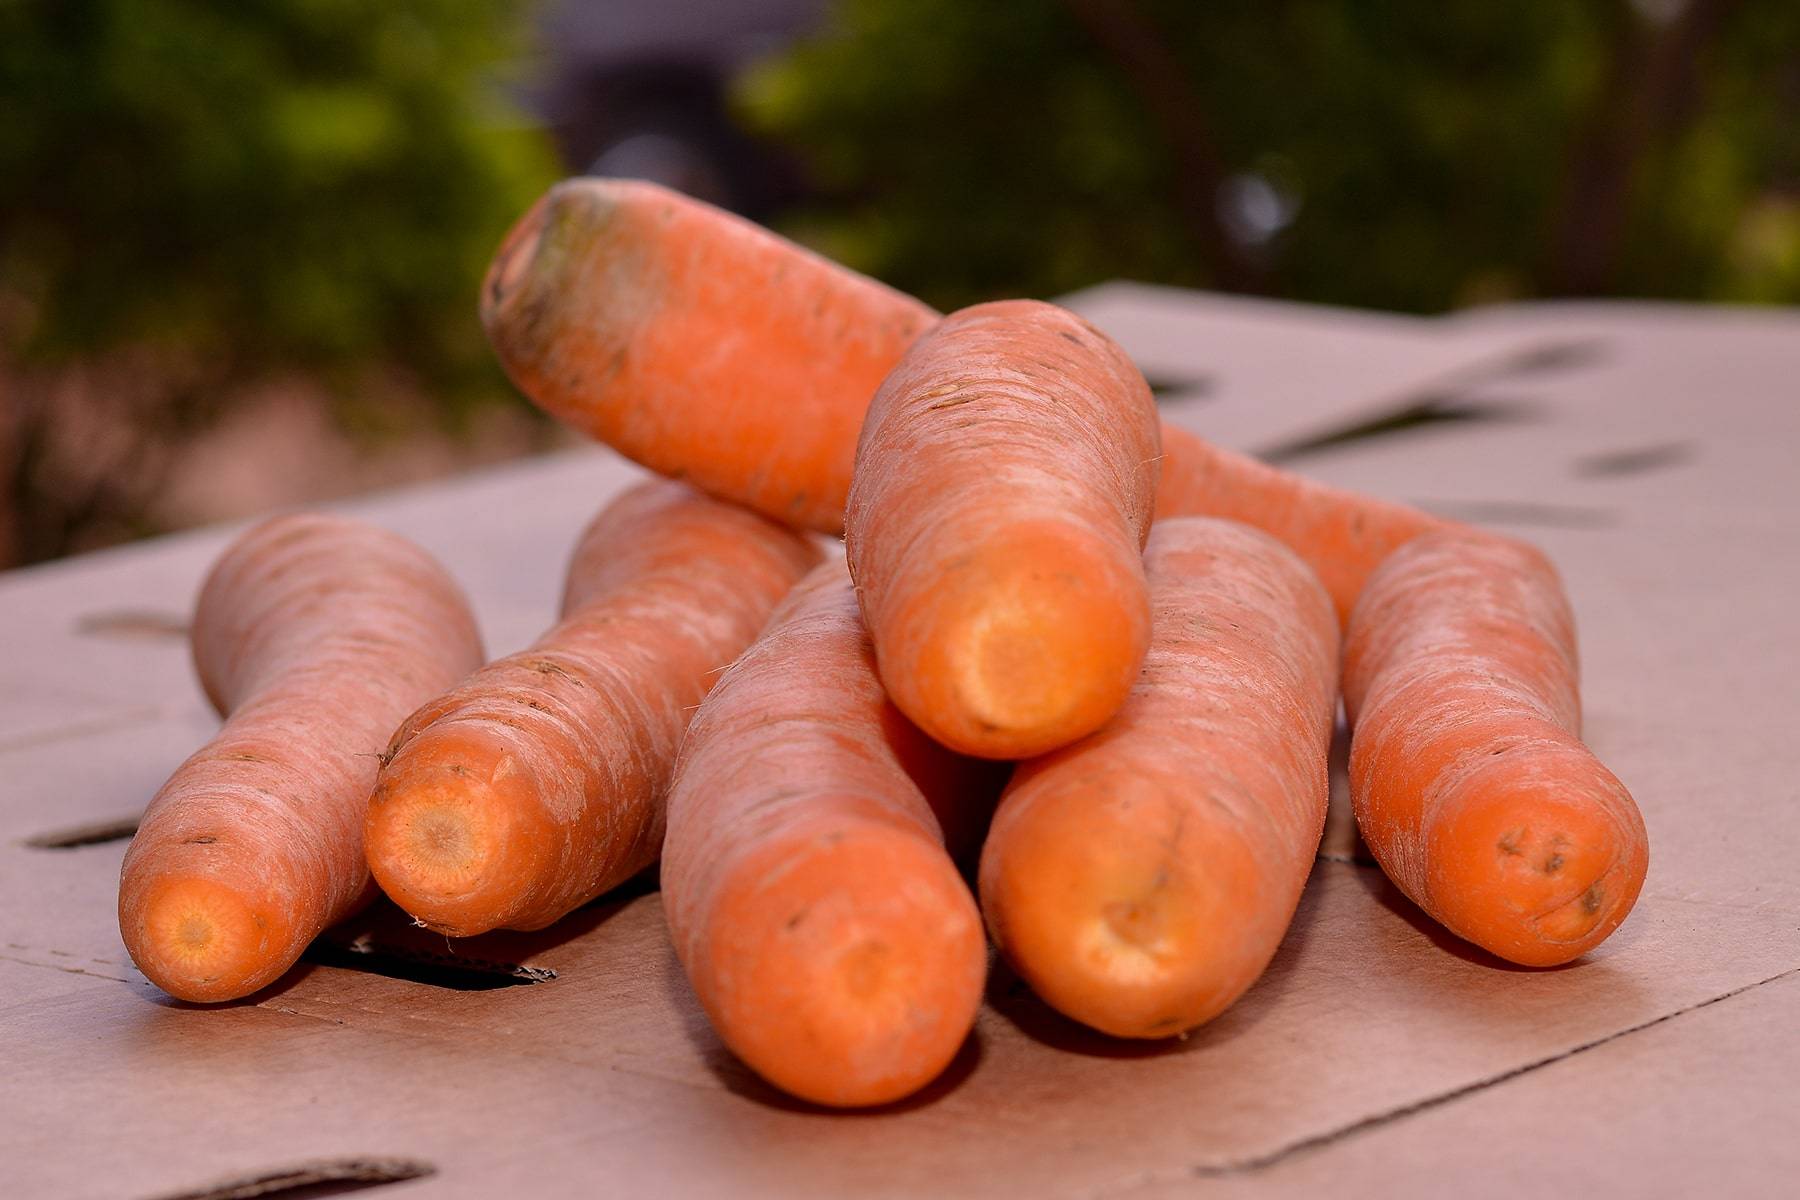 Carrots for Export and Sale